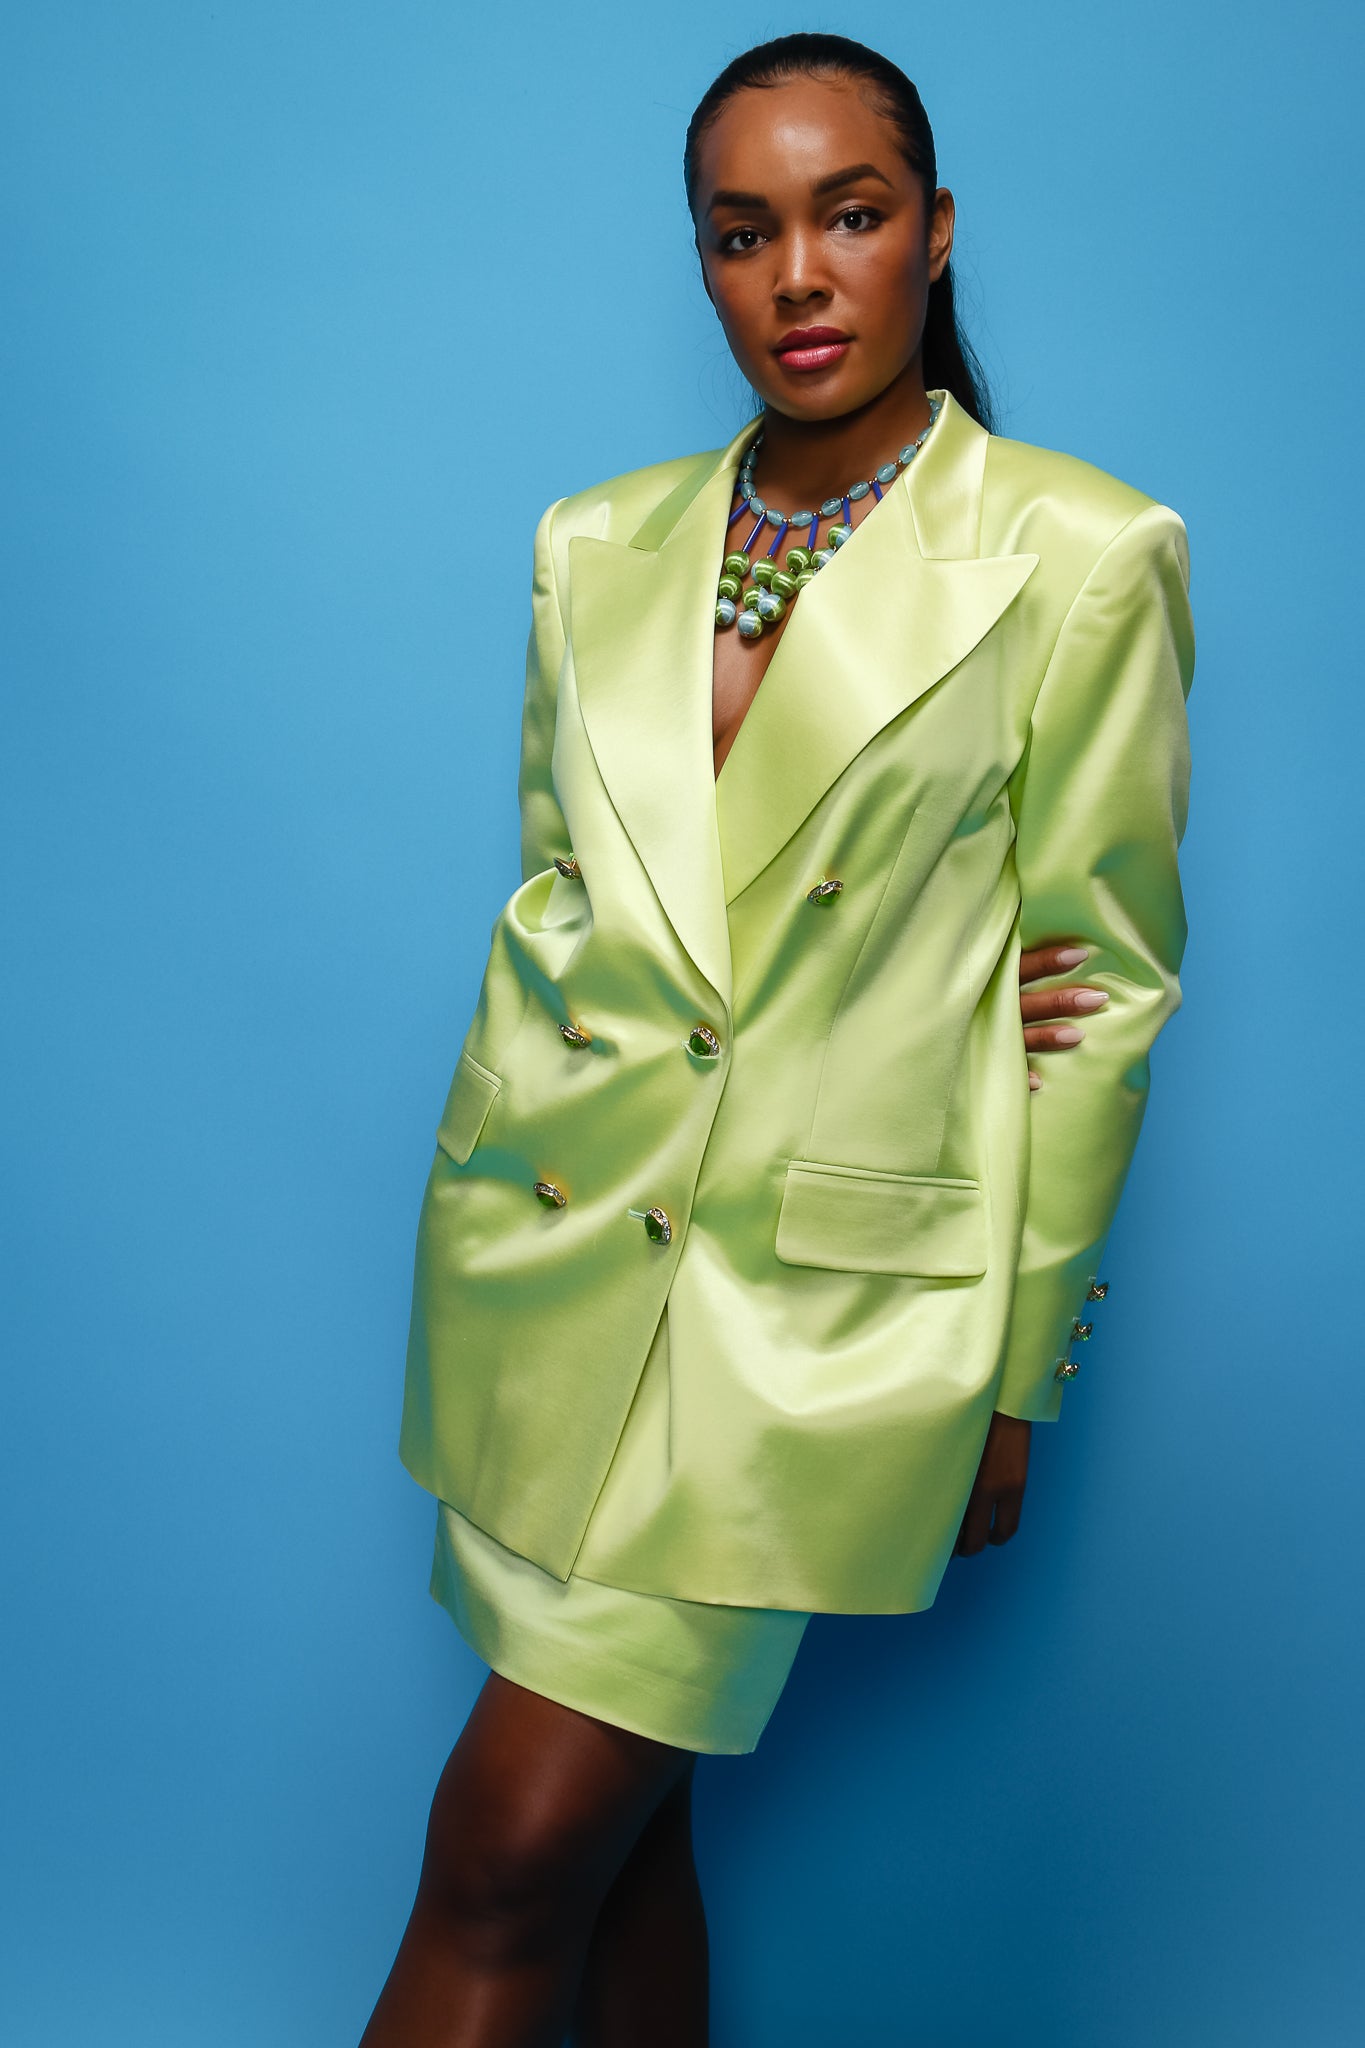 Brittany Hampton in Vintage Escada Satin Double Breasted Skirt Suit on blue at Recess Los Angeles